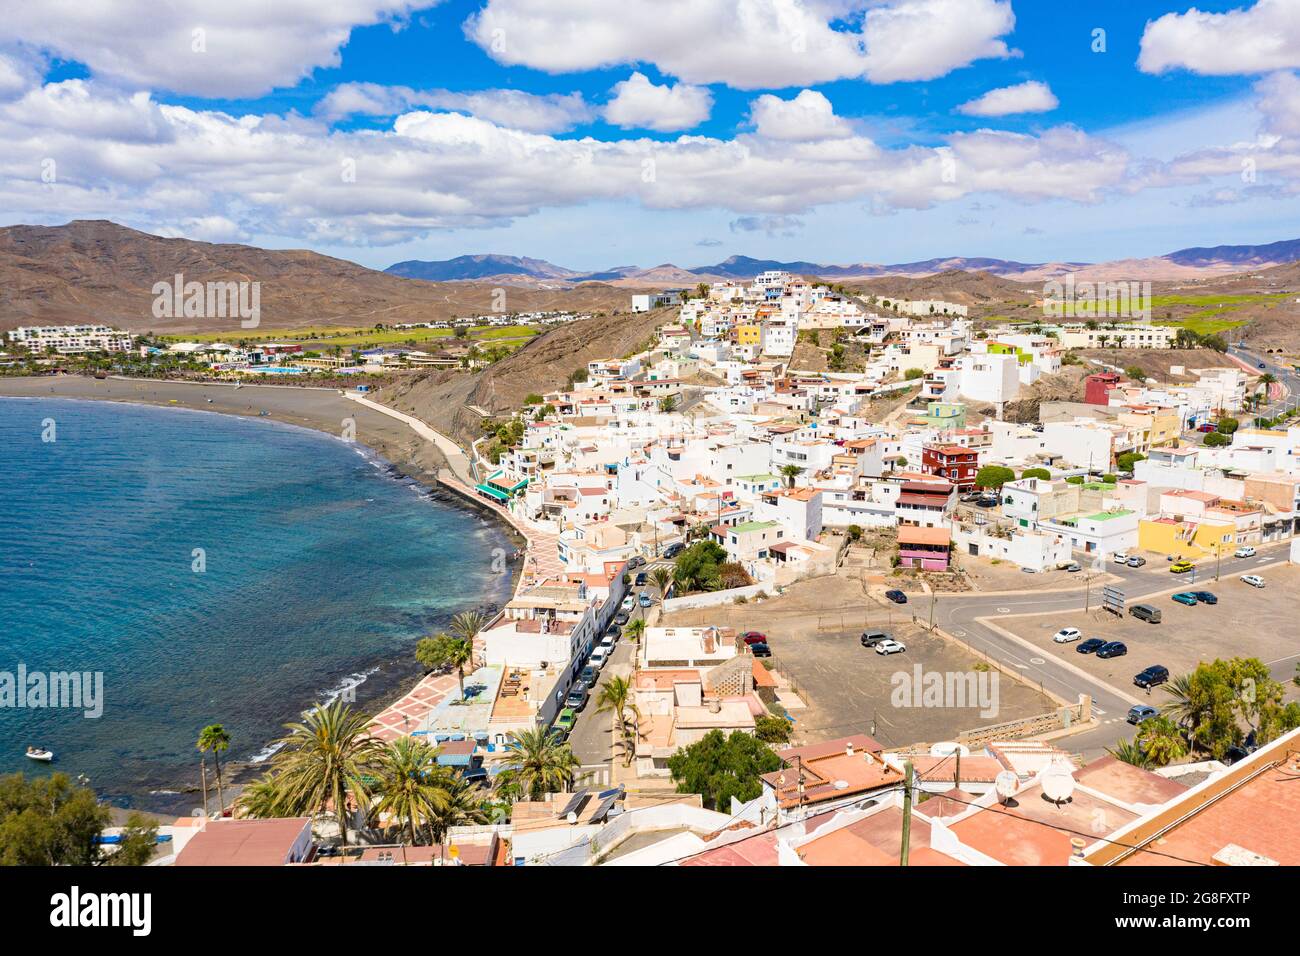 High angle view of the seaside town of Las Playitas, Fuerteventura, Canary Islands, Spain, Atlantic, Europe Stock Photo